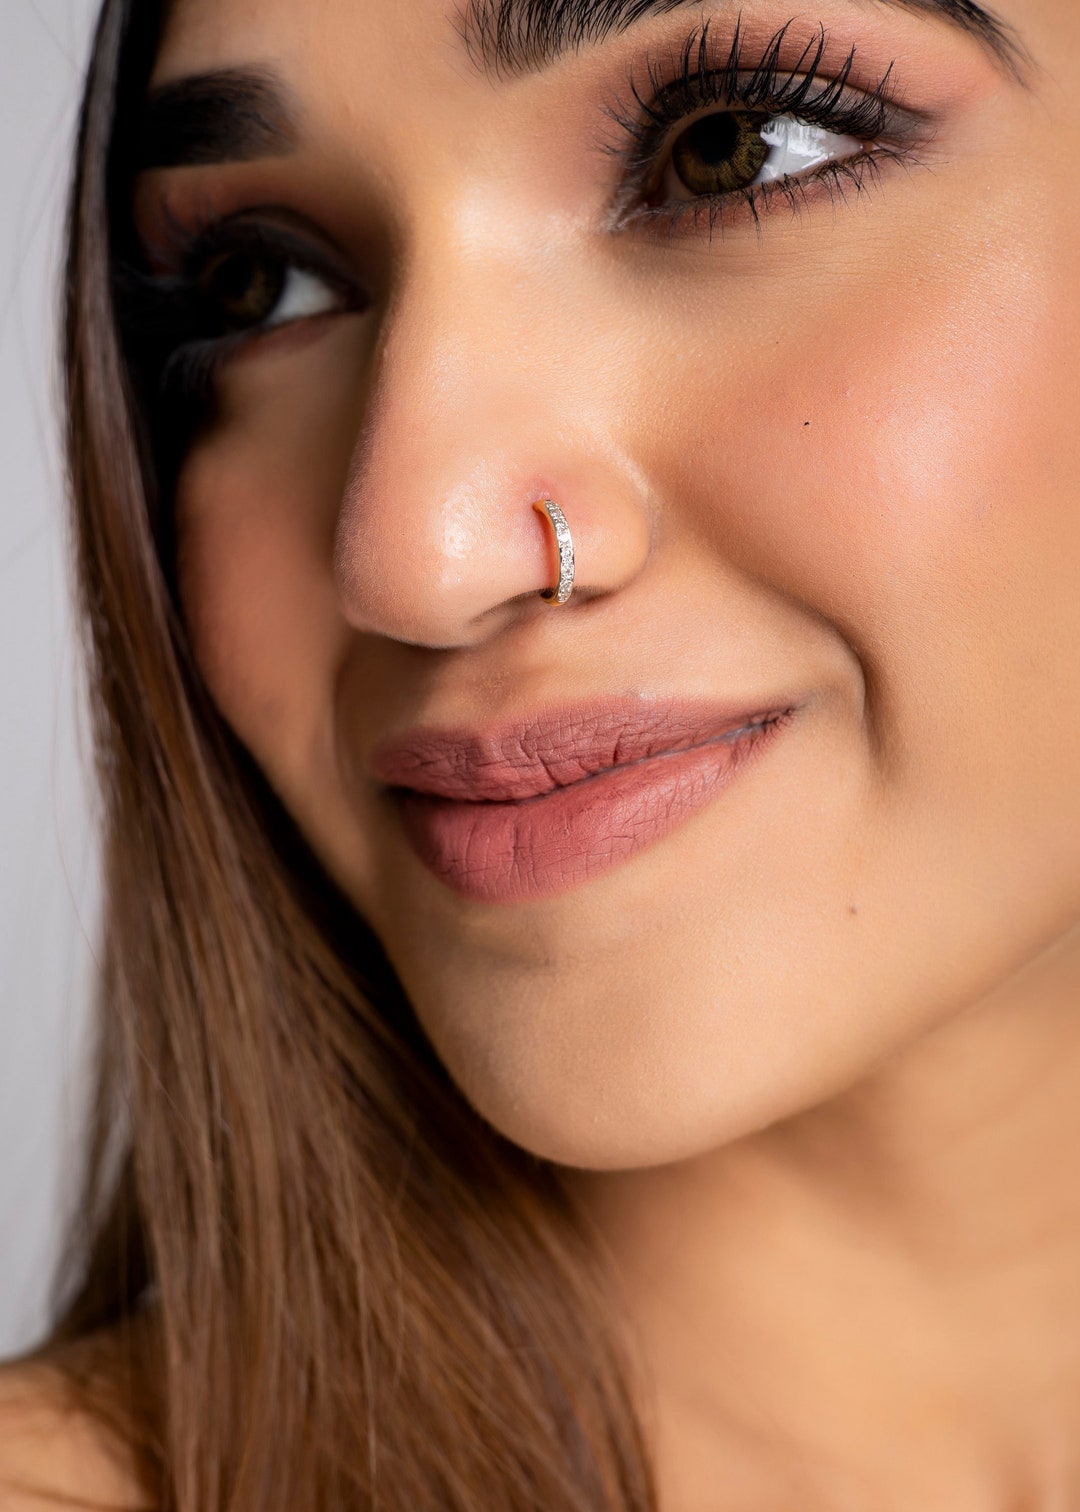 1,273 Colored Girl Nose Ring Royalty-Free Photos and Stock Images |  Shutterstock